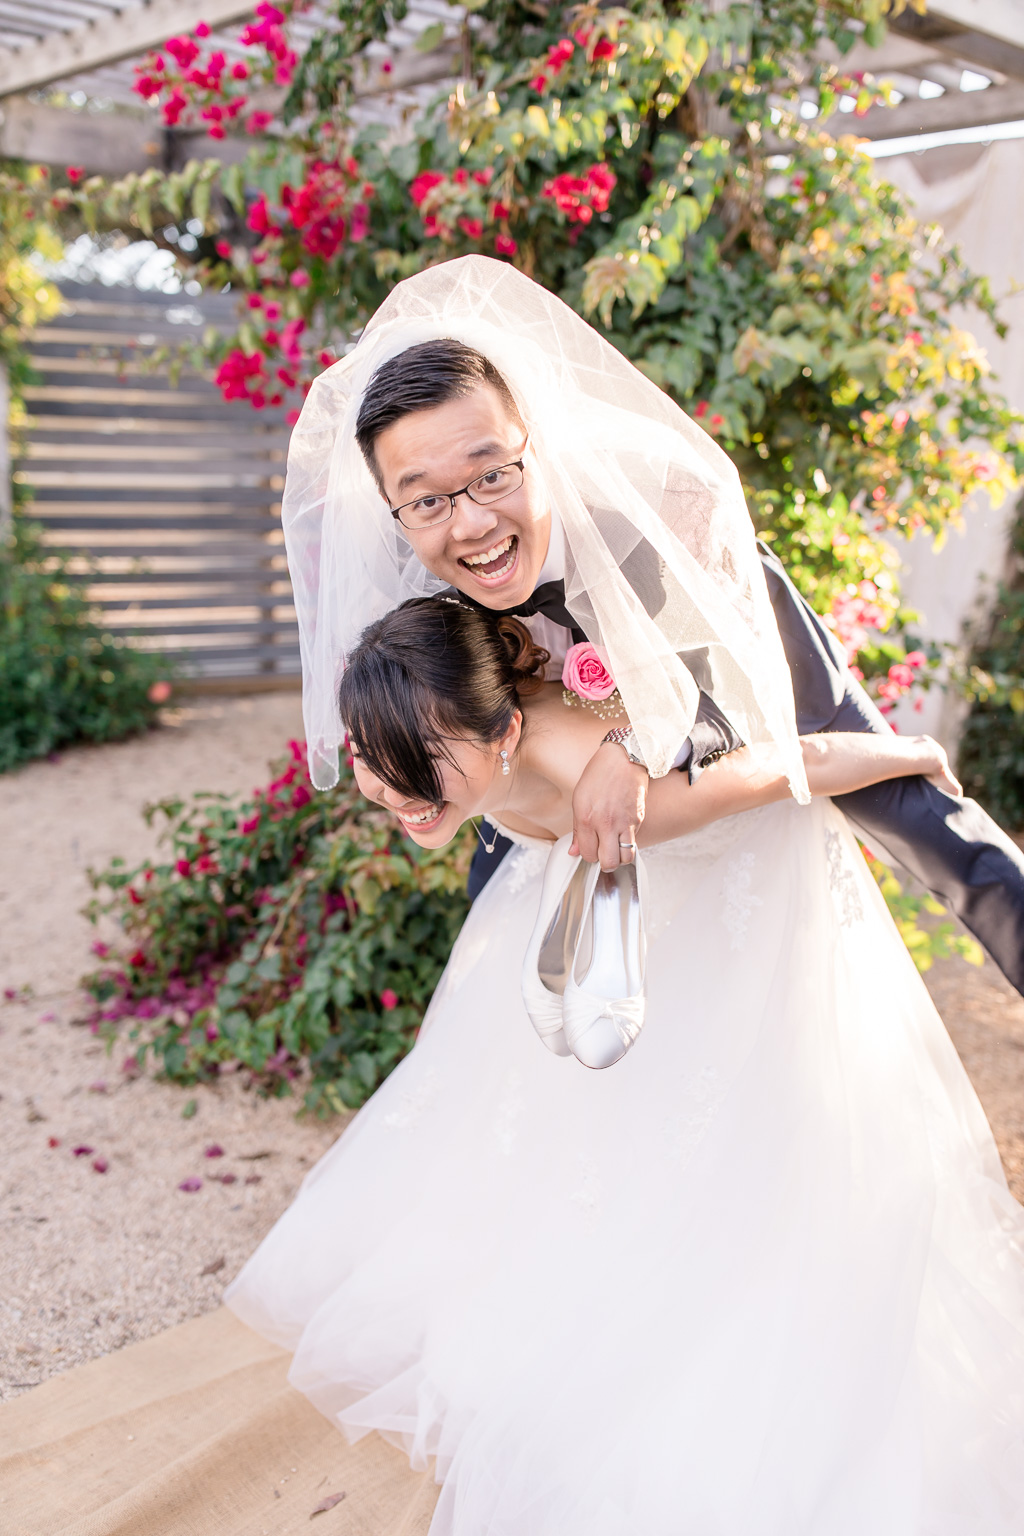 hilarious photo of the bride carring the groom on her back